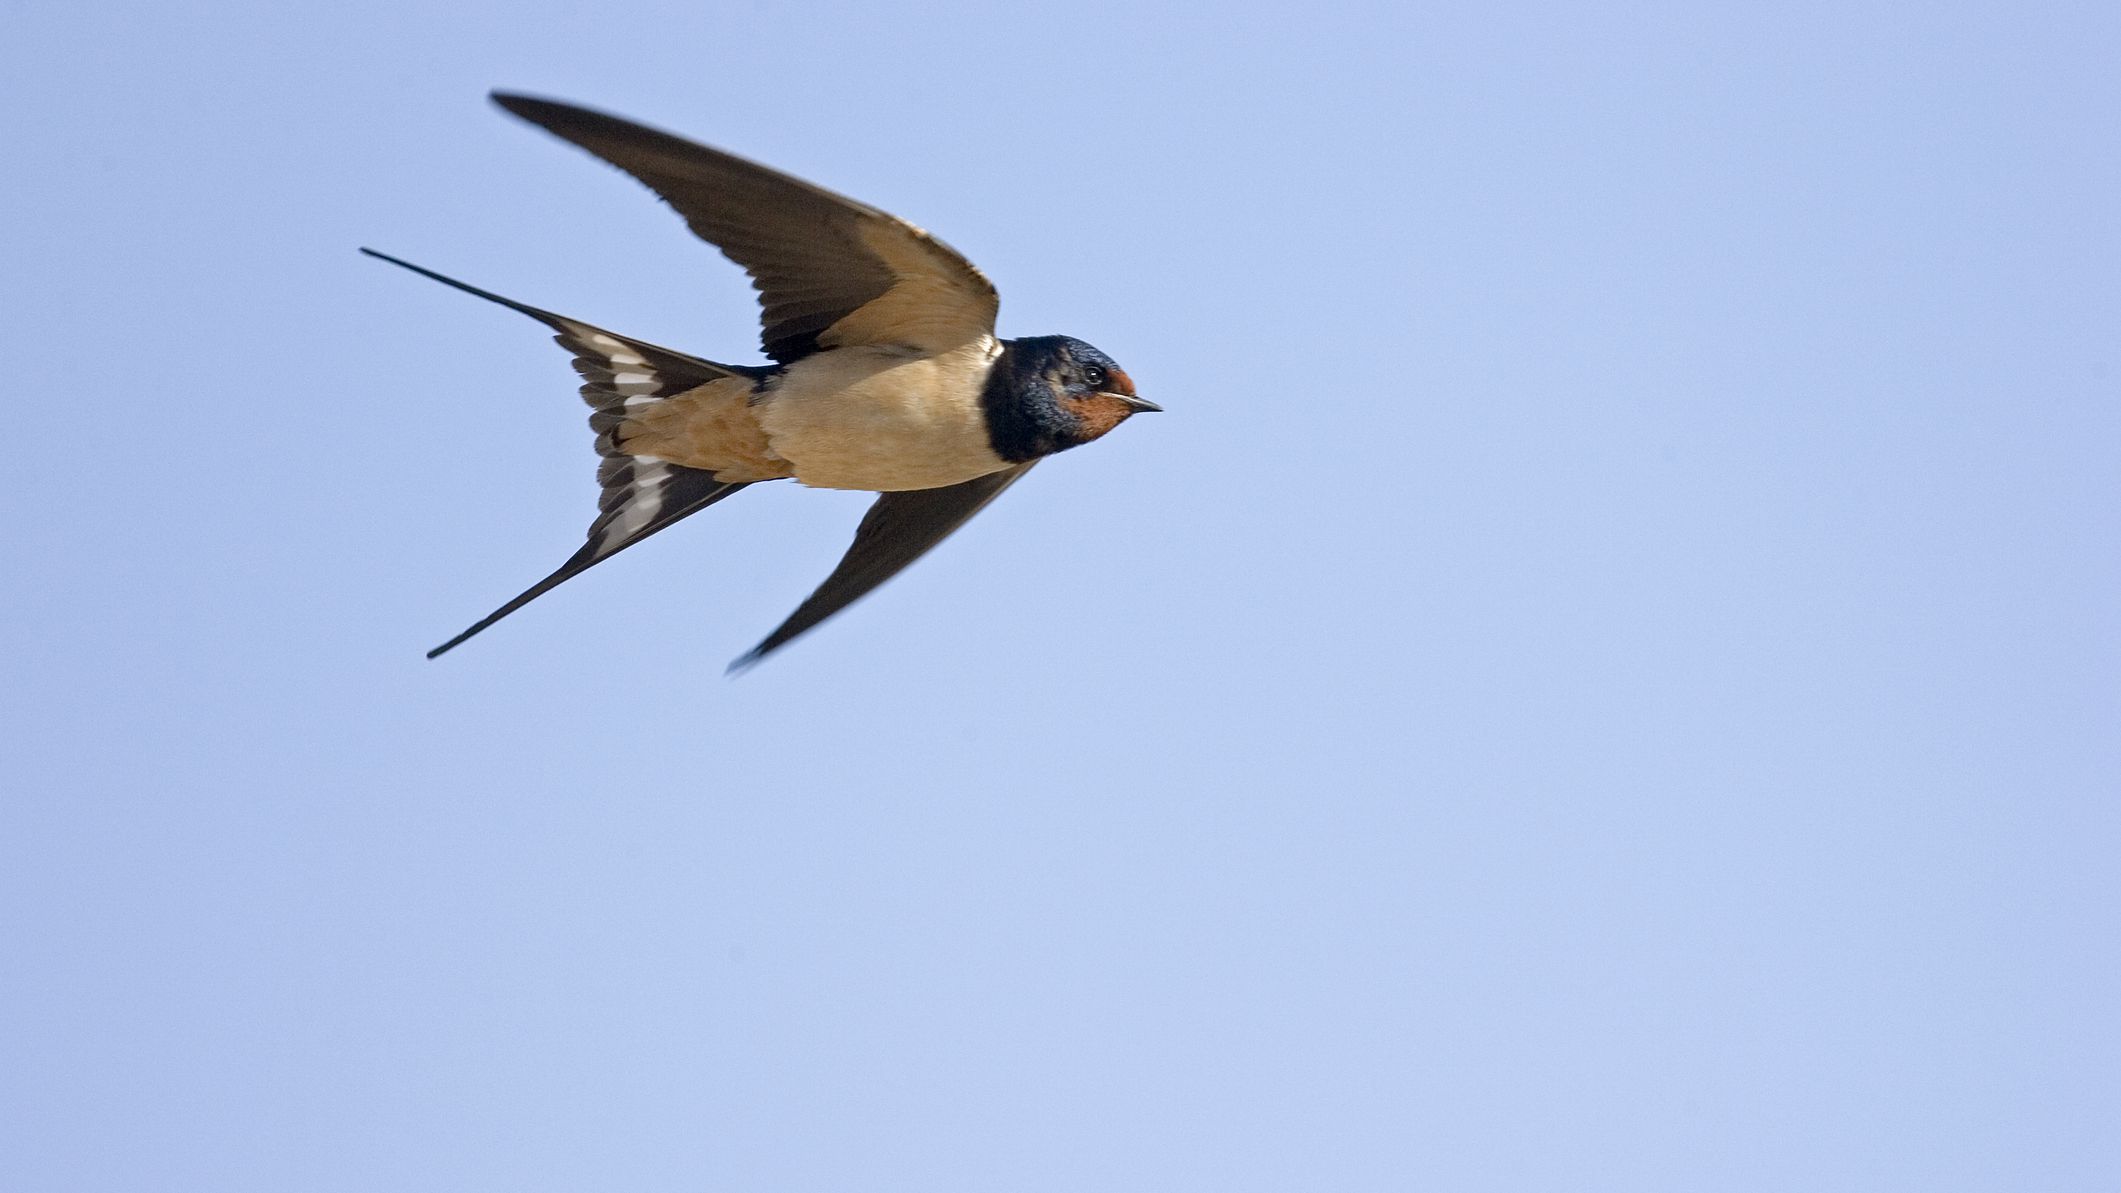 How fast do birds dive bomb?